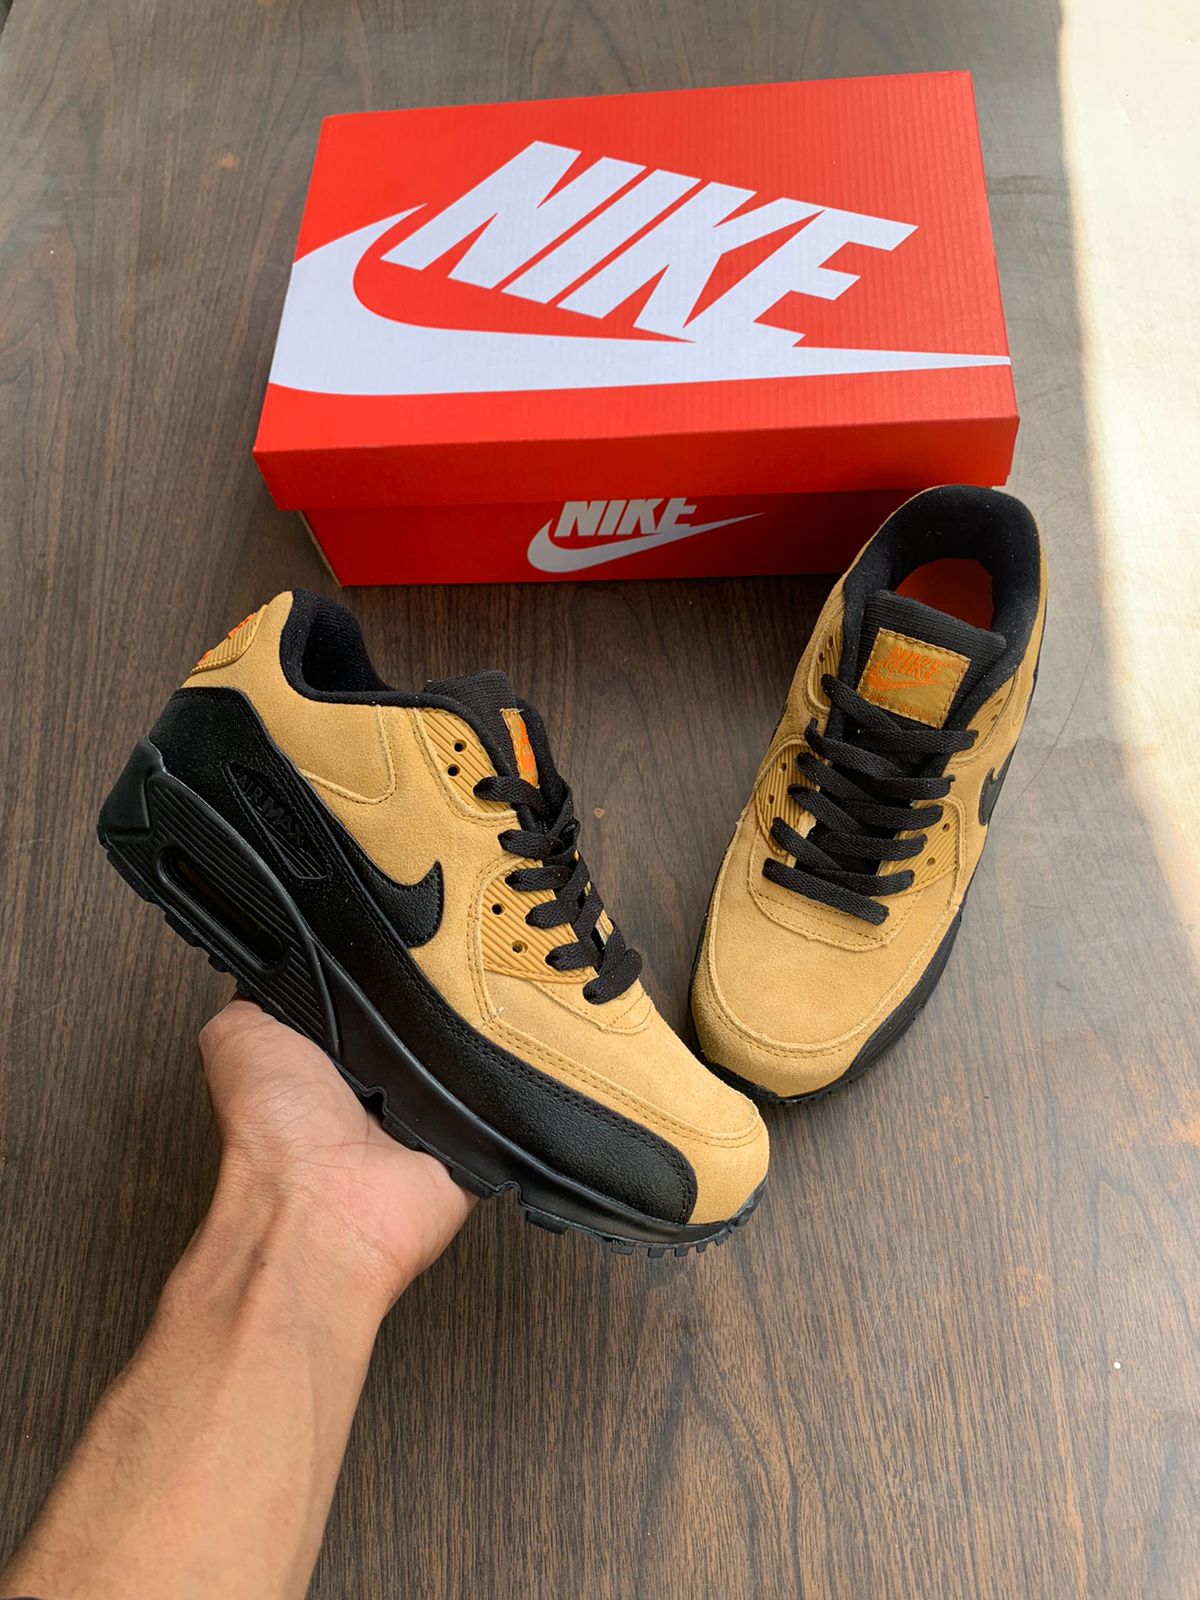 Branded Airmax Nike copy shoes | First copy shoe